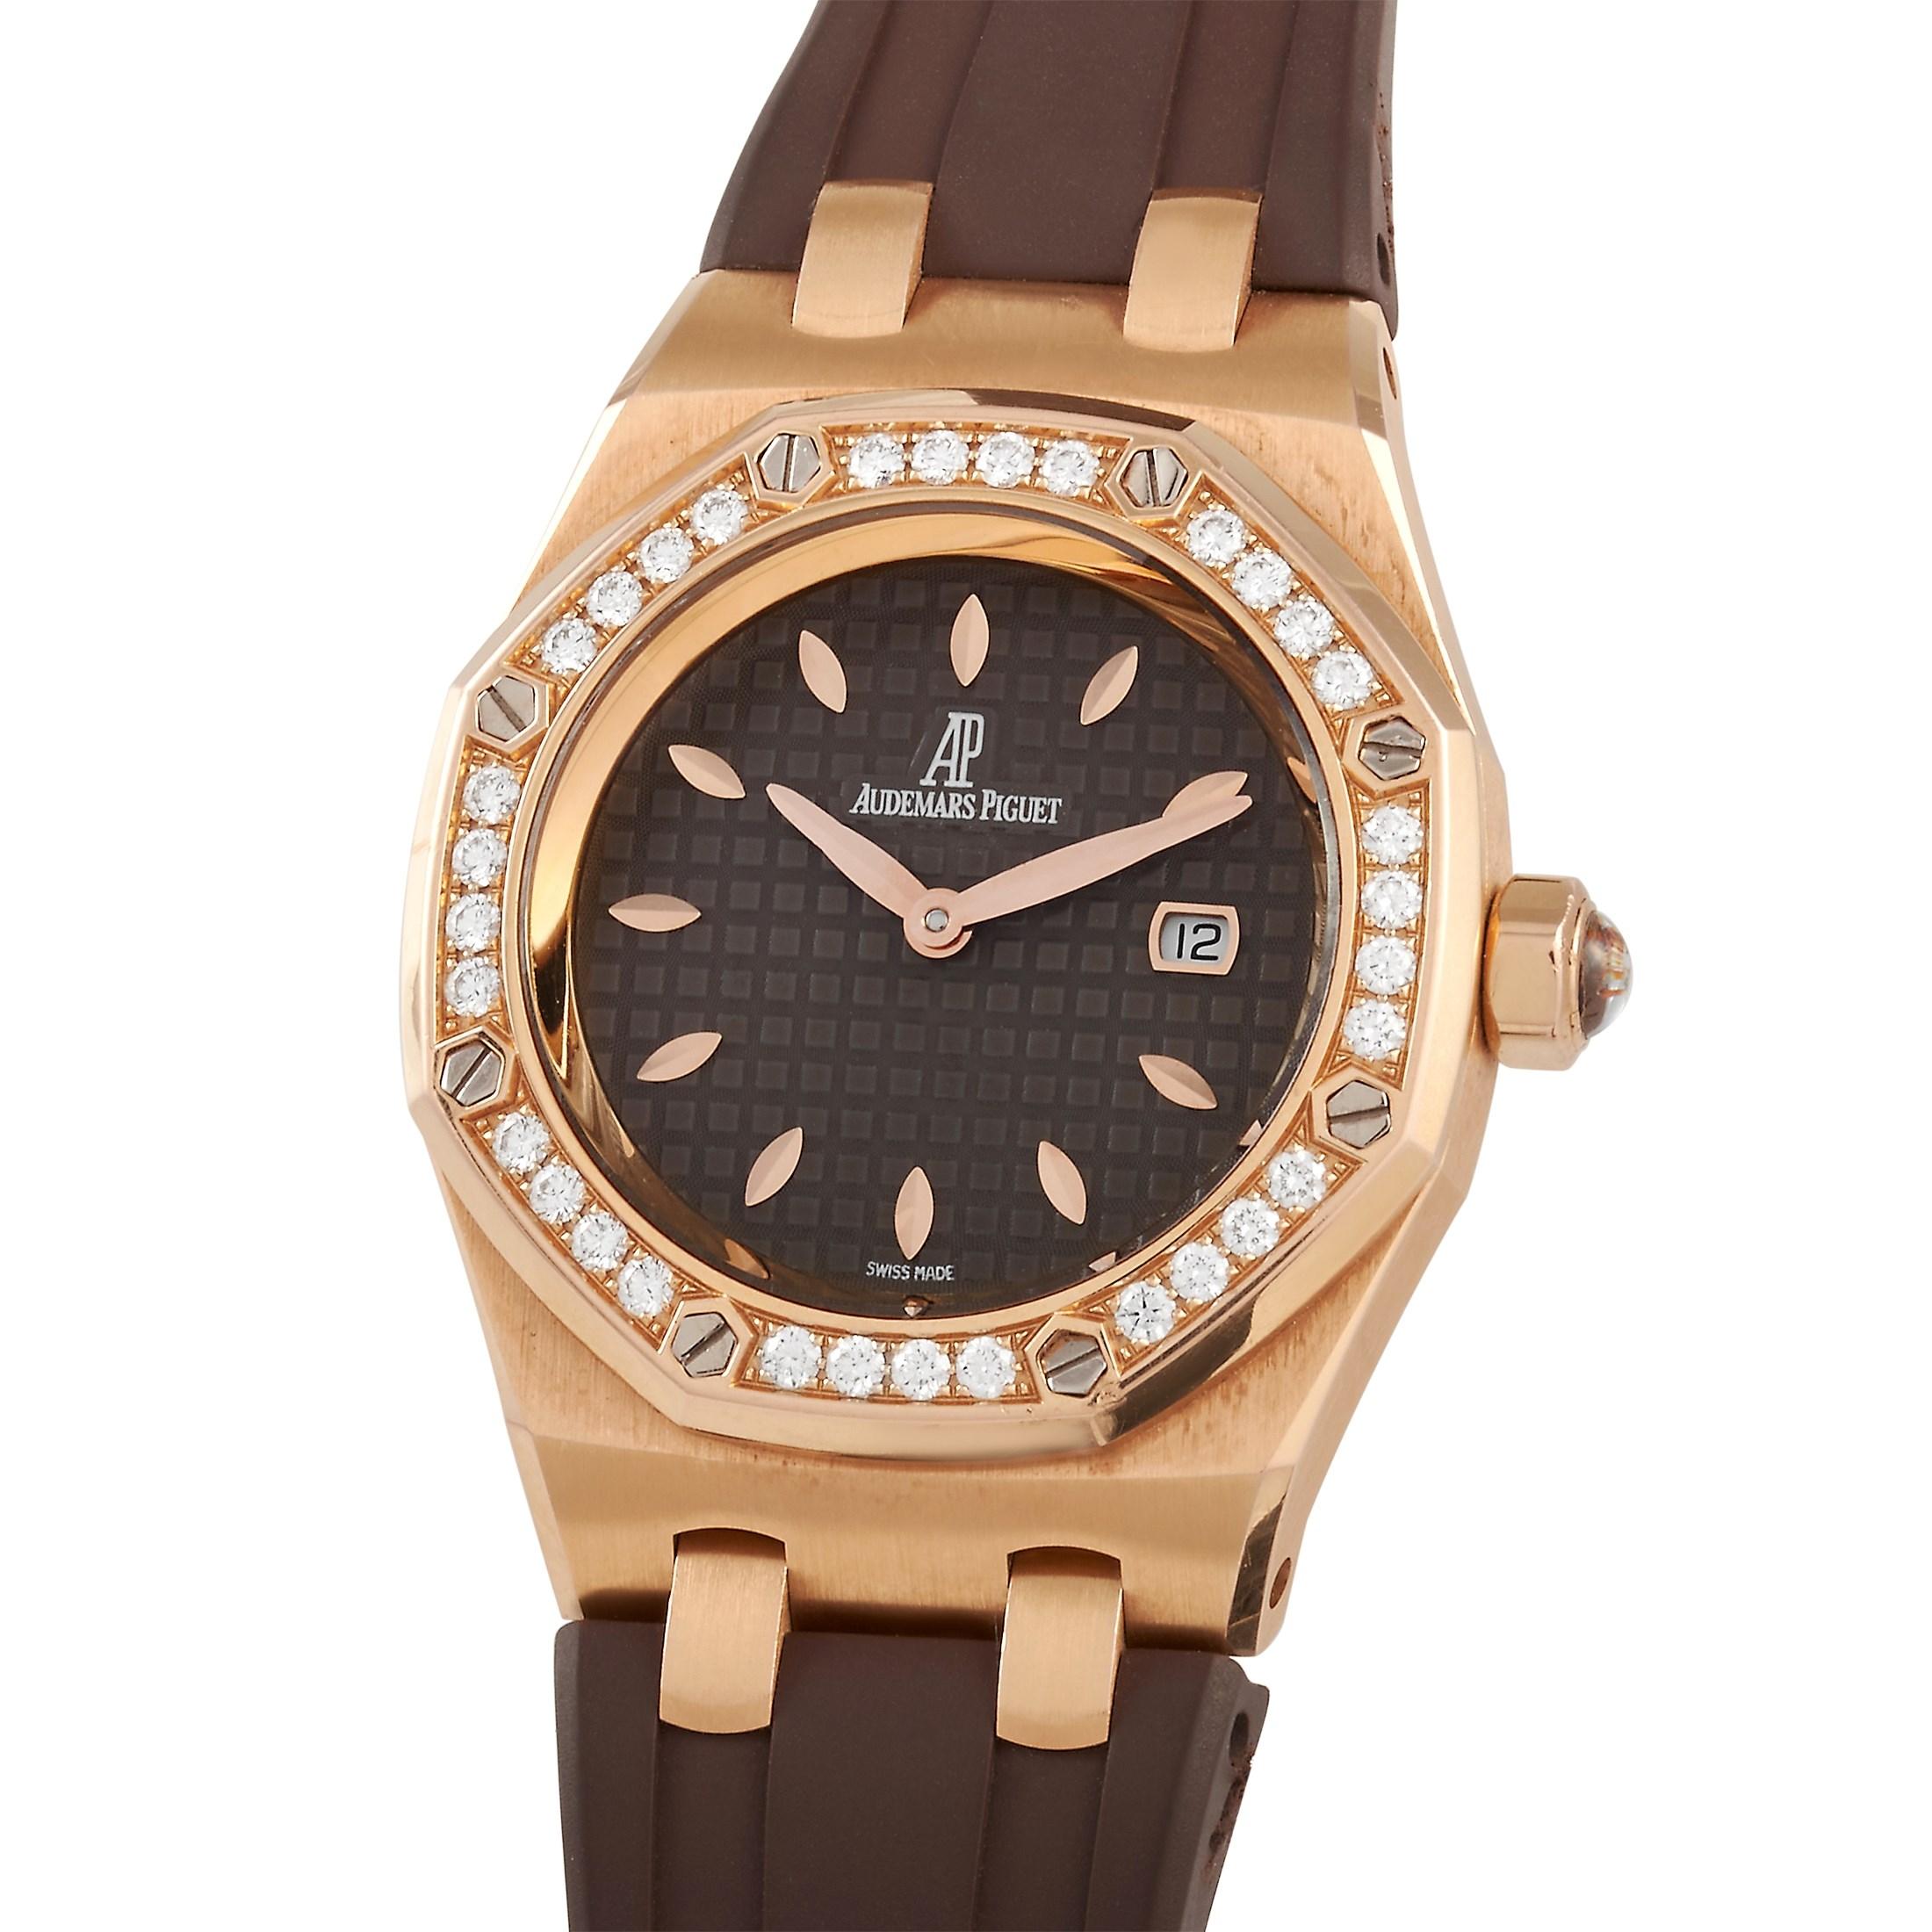 Thirty-two brilliant-cut diamonds make this ladies' watch shine. The Audemars Piguet Royal Oak Lady Automatic Watch 77321OR.ZZ.D080CA.01 features a diamond-set bezel, an 18K rose gold case with polished bevel edges, a metallic brown dial with